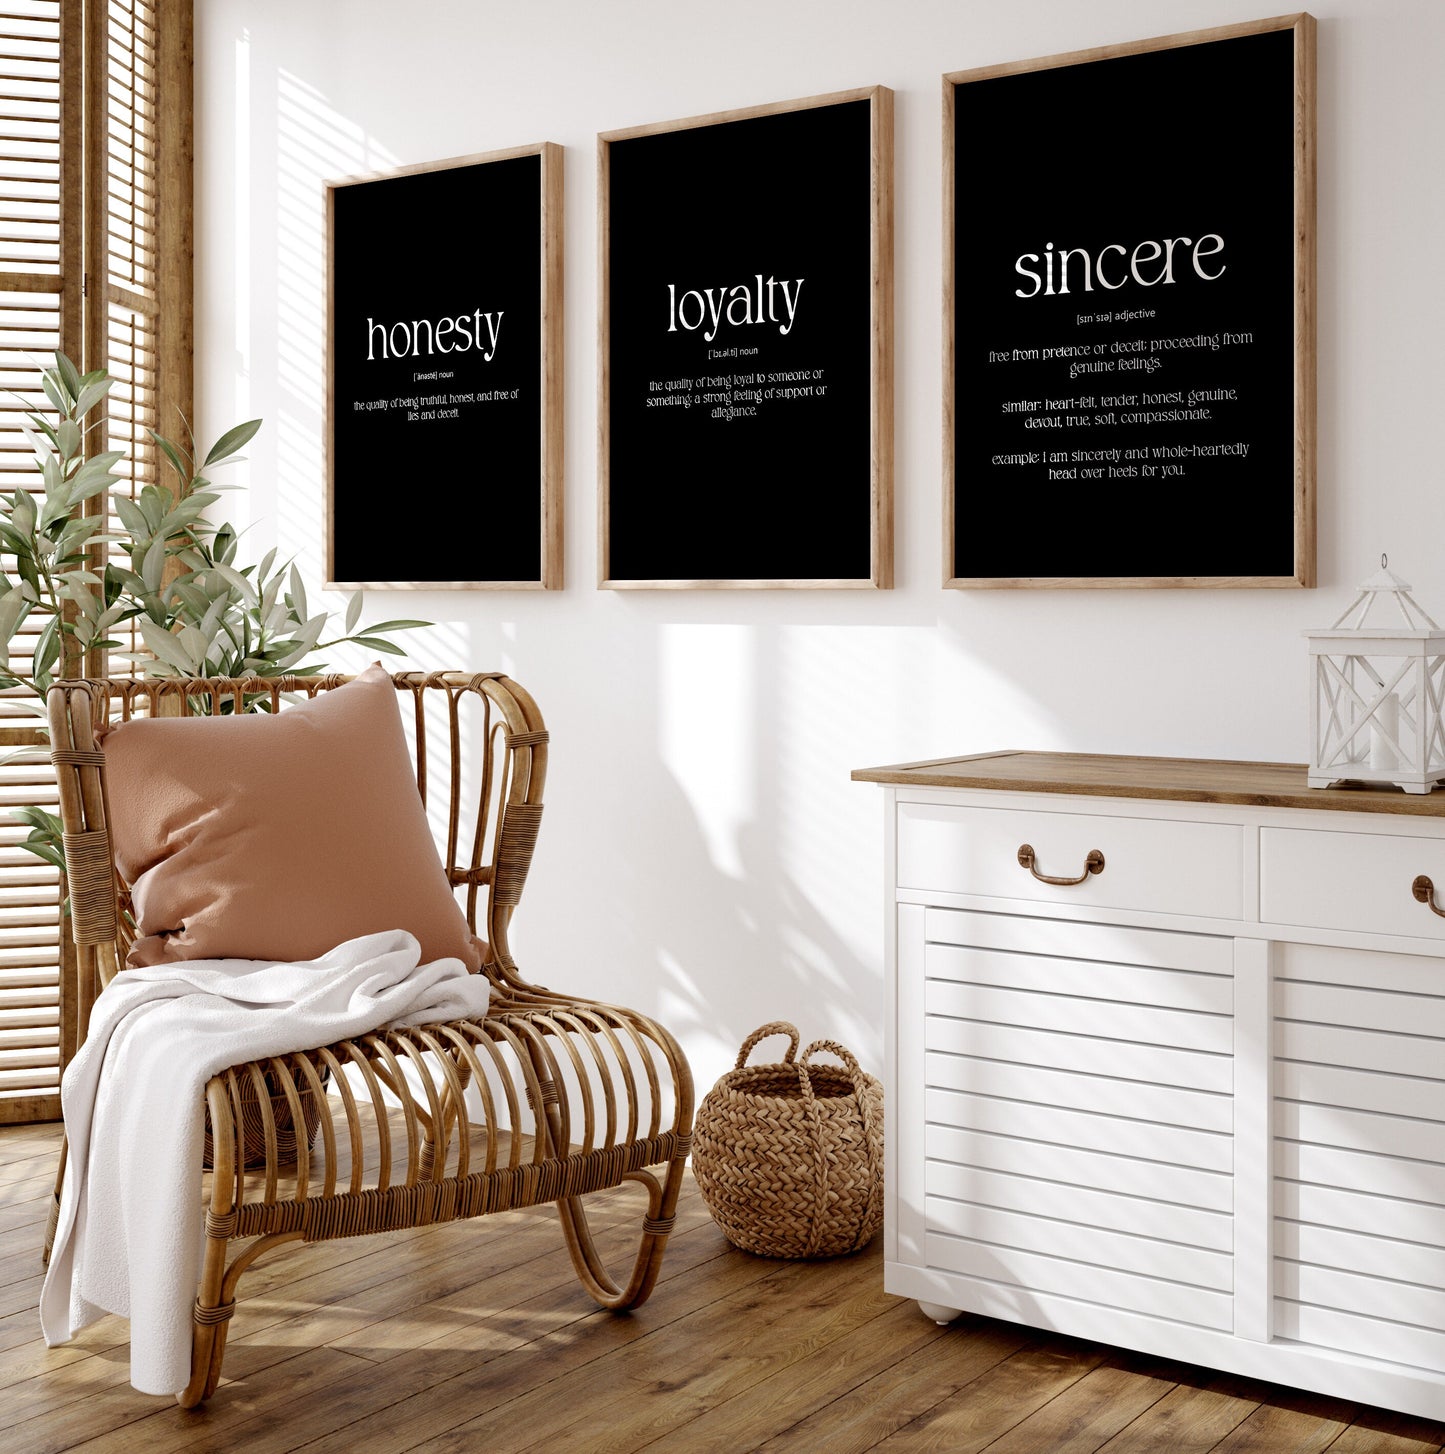 Sincere, Loyalty, Honesty Set Of 3 Definition Prints - Magic Posters